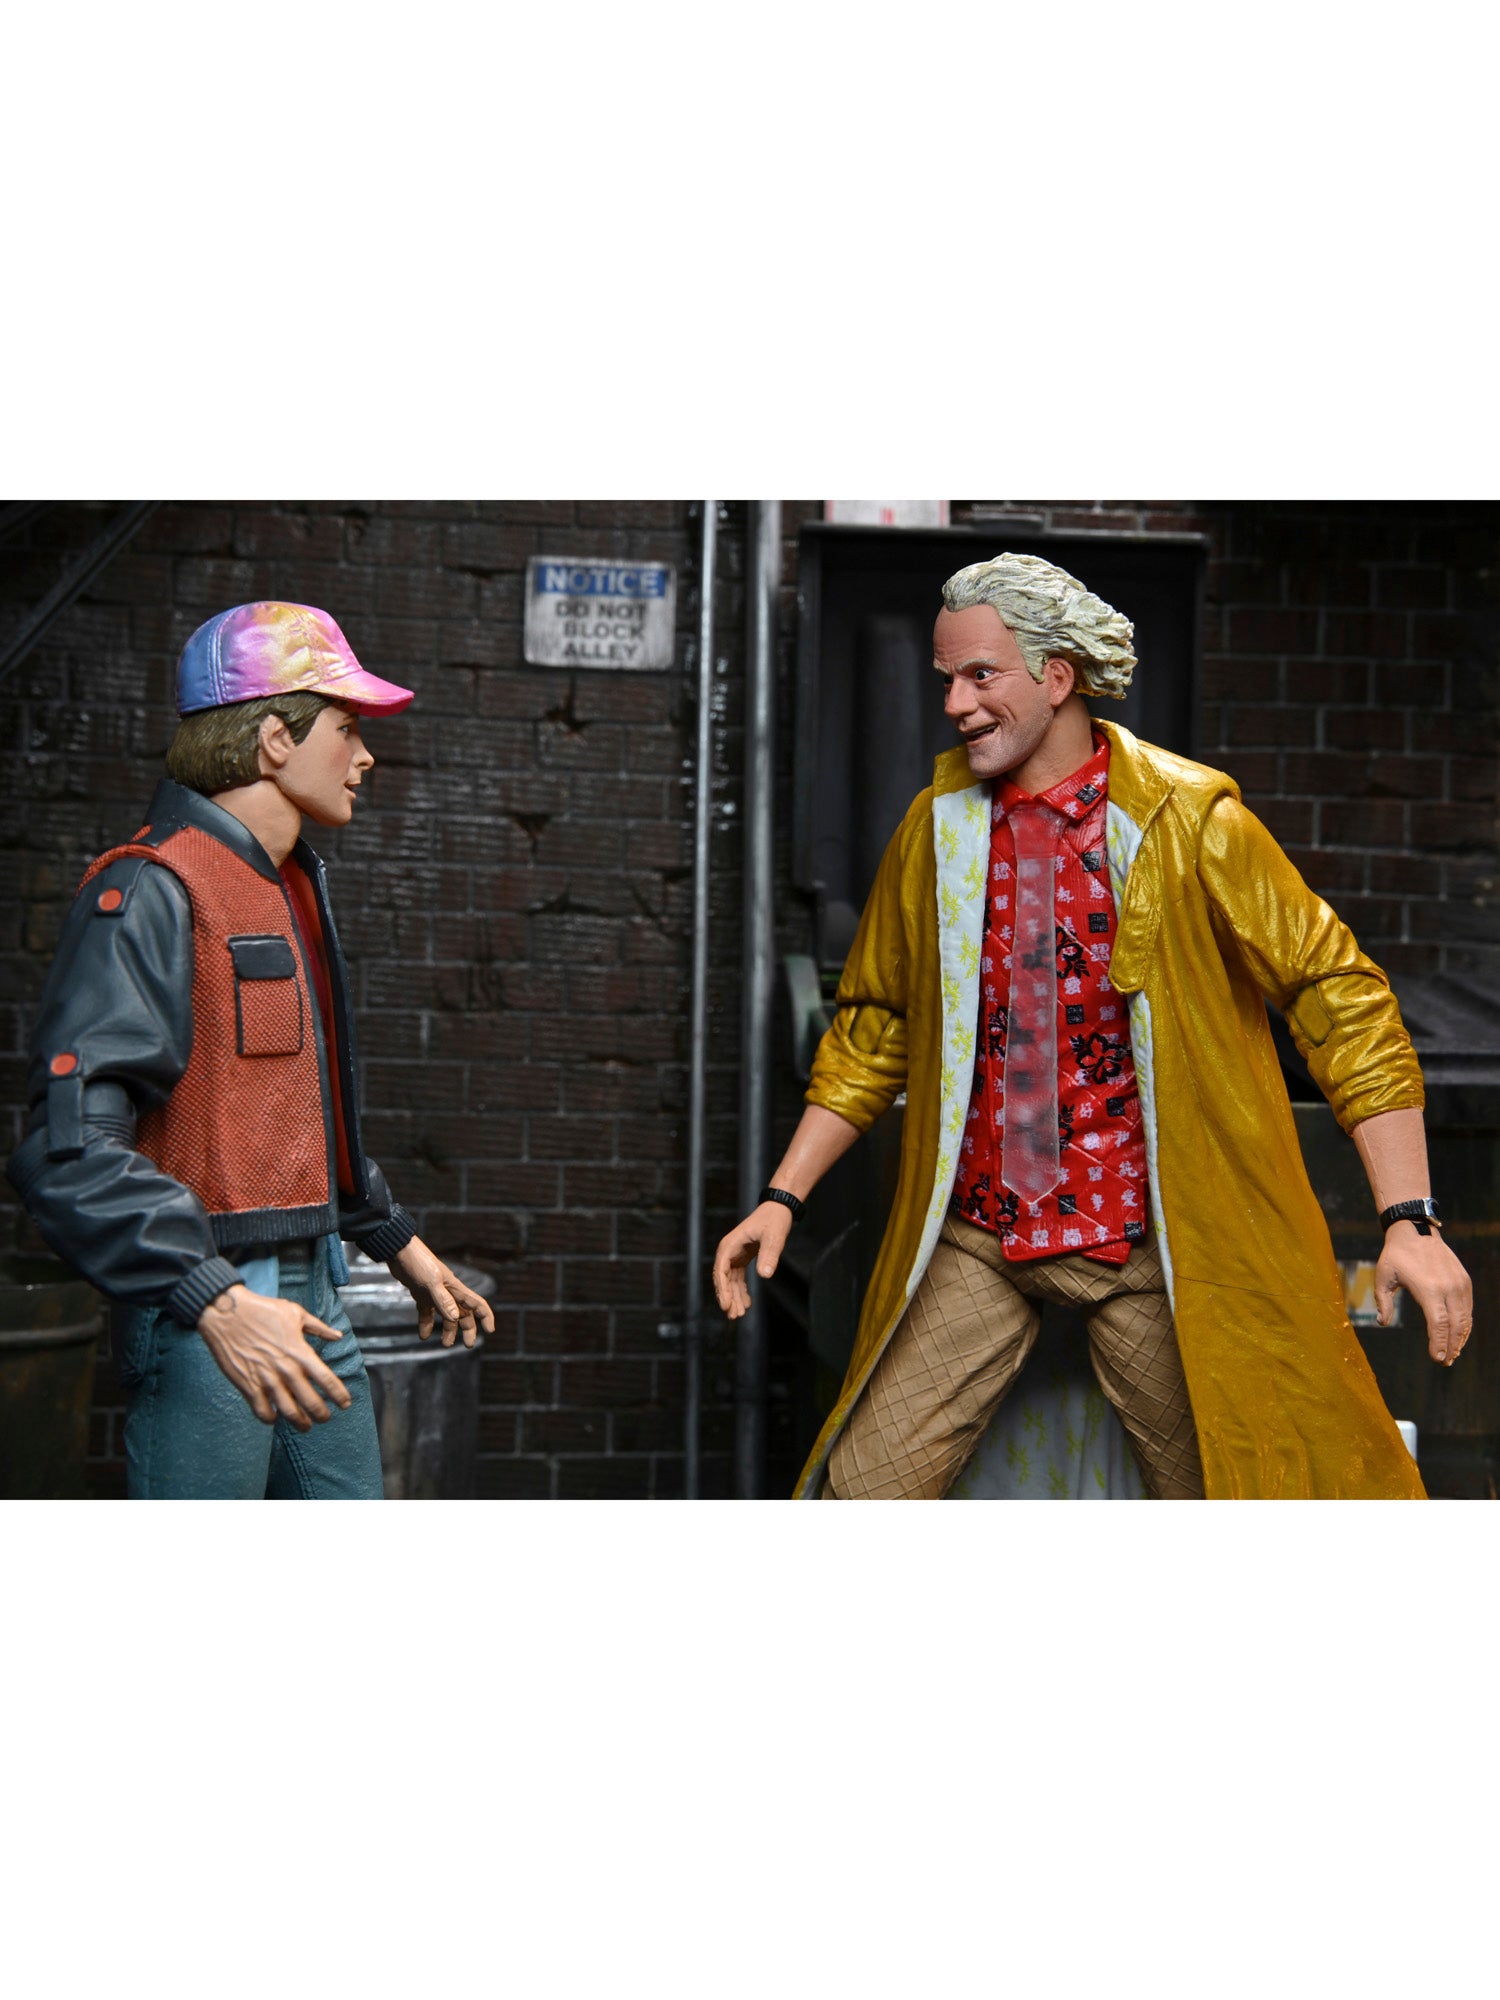 NECA - Back To The Future Part 2 - 7" Scale Action Figure - Ultimate Doc Brown (2015) - costumes.com